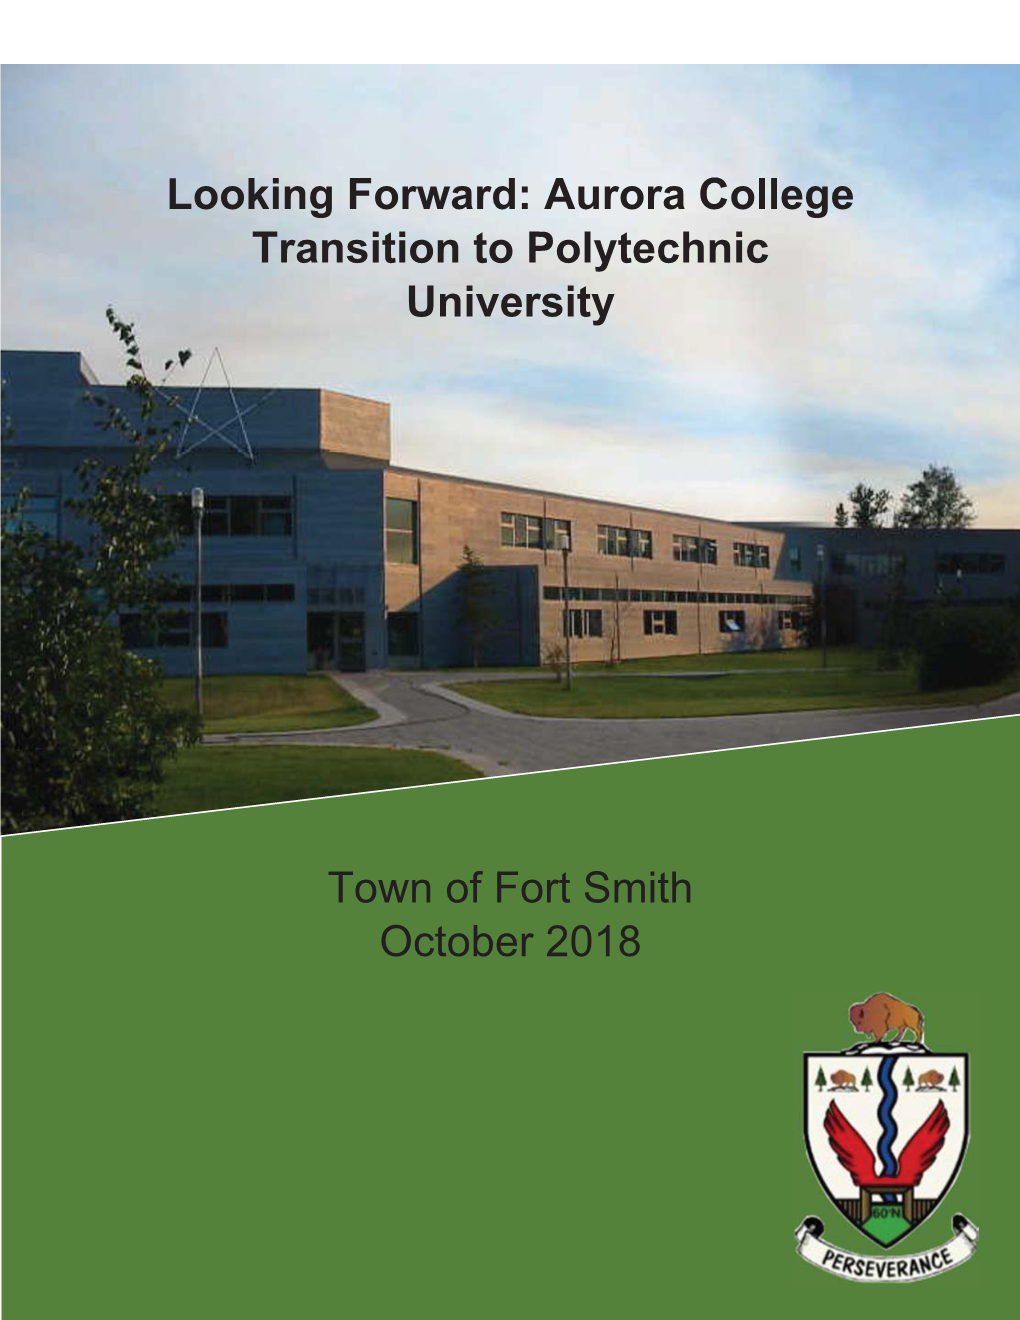 Looking Forward: Aurora College Transition to Polytechnic University